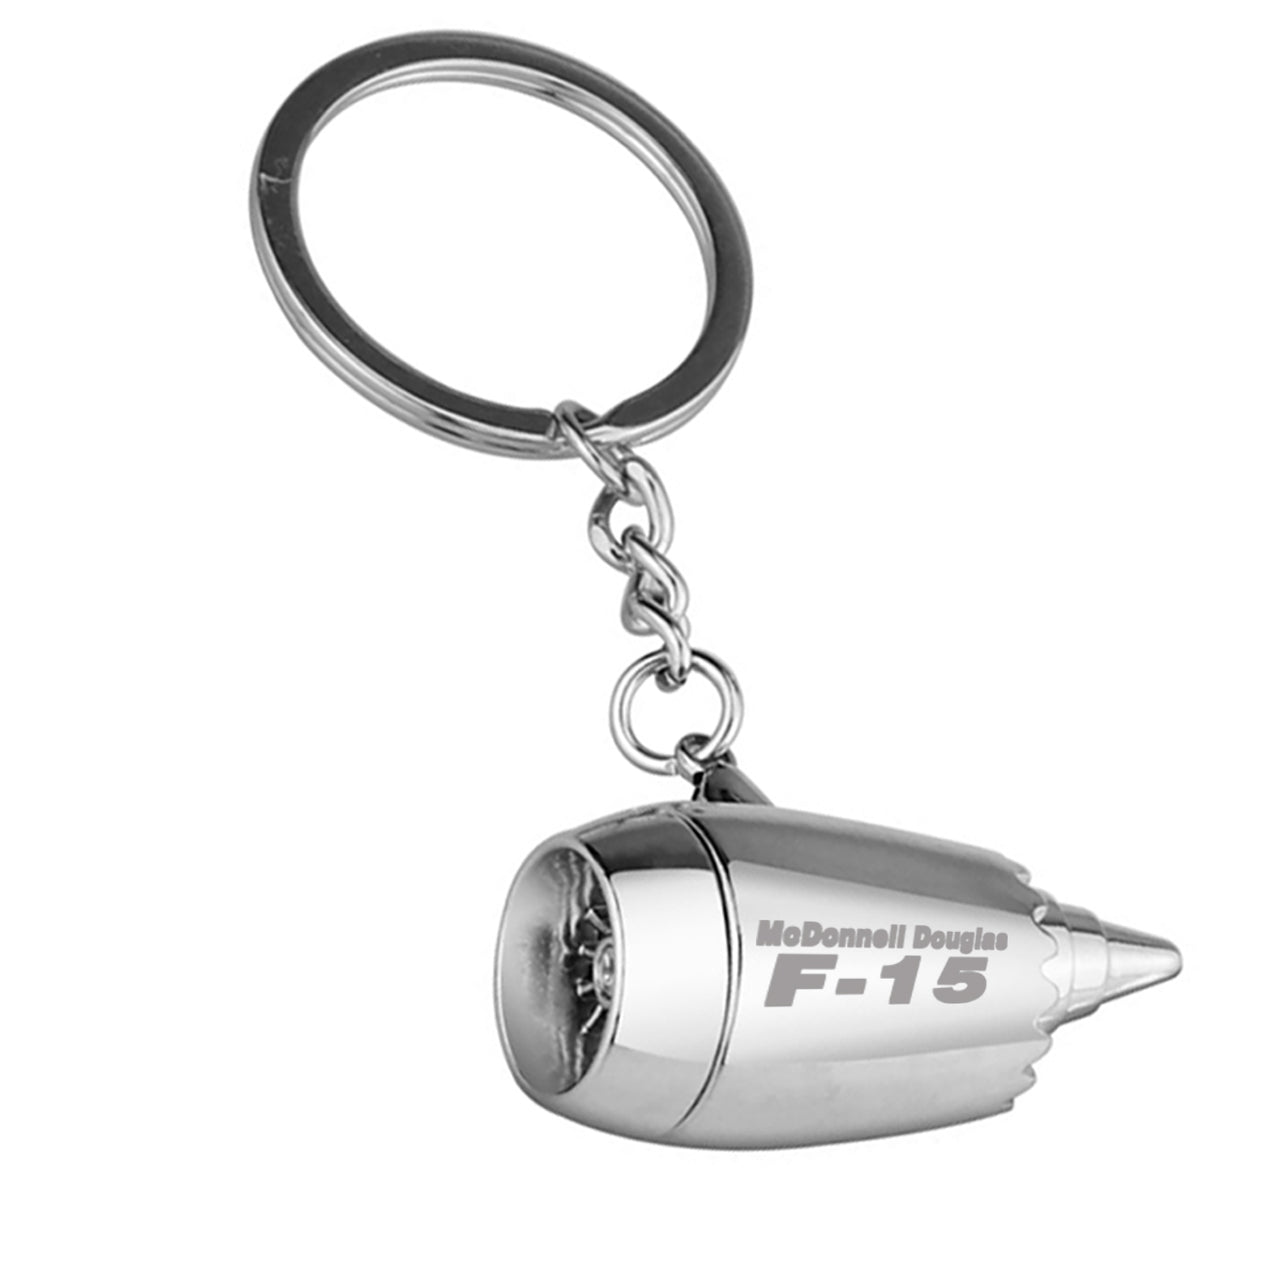 The McDonnell Douglas F15 Designed Airplane Jet Engine Shaped Key Chain